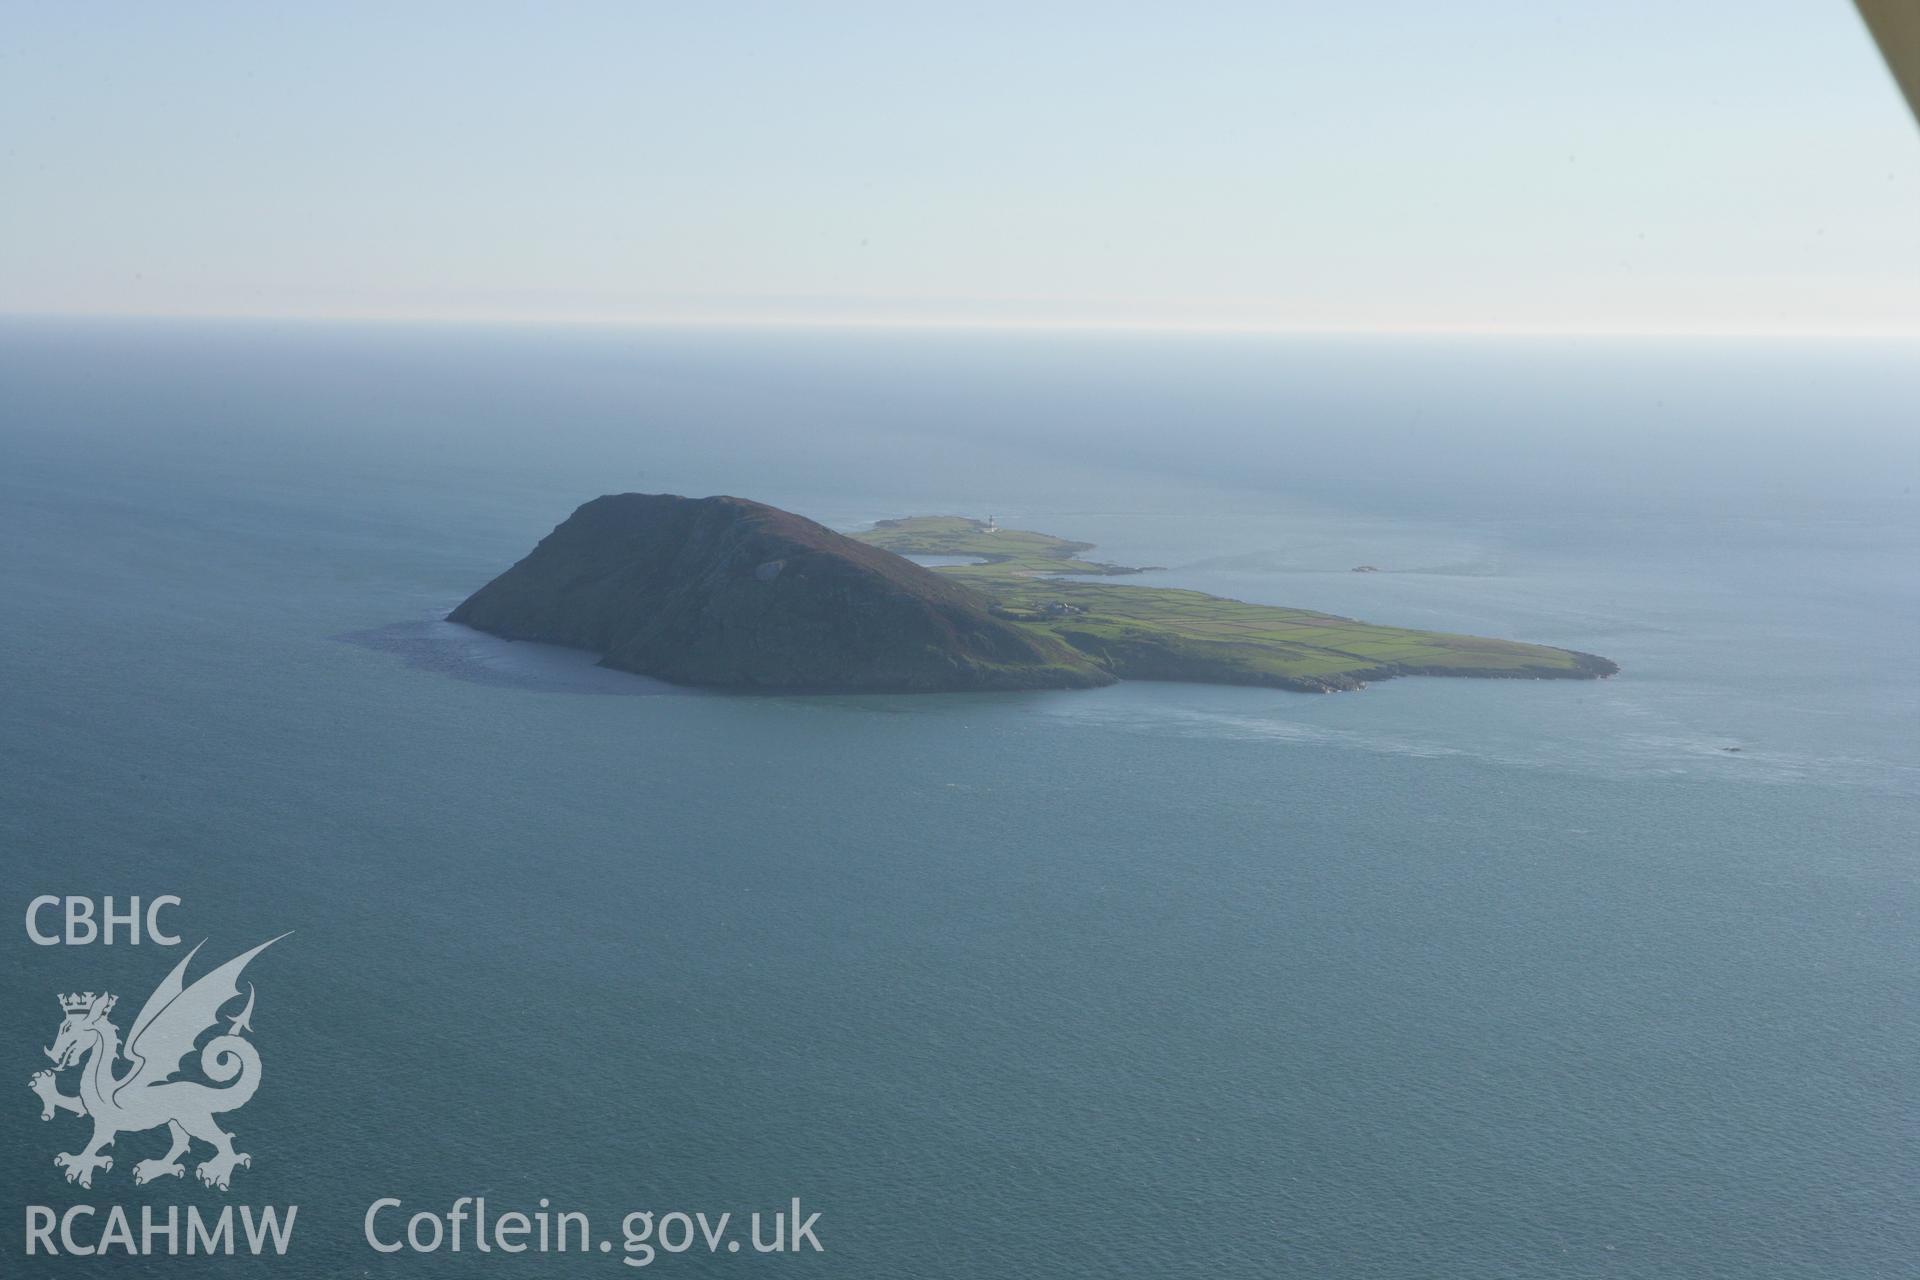 RCAHMW colour oblique aerial photograph of Bardsey Island (Ynys Enlli). Taken on 06 September 2007 by Toby Driver